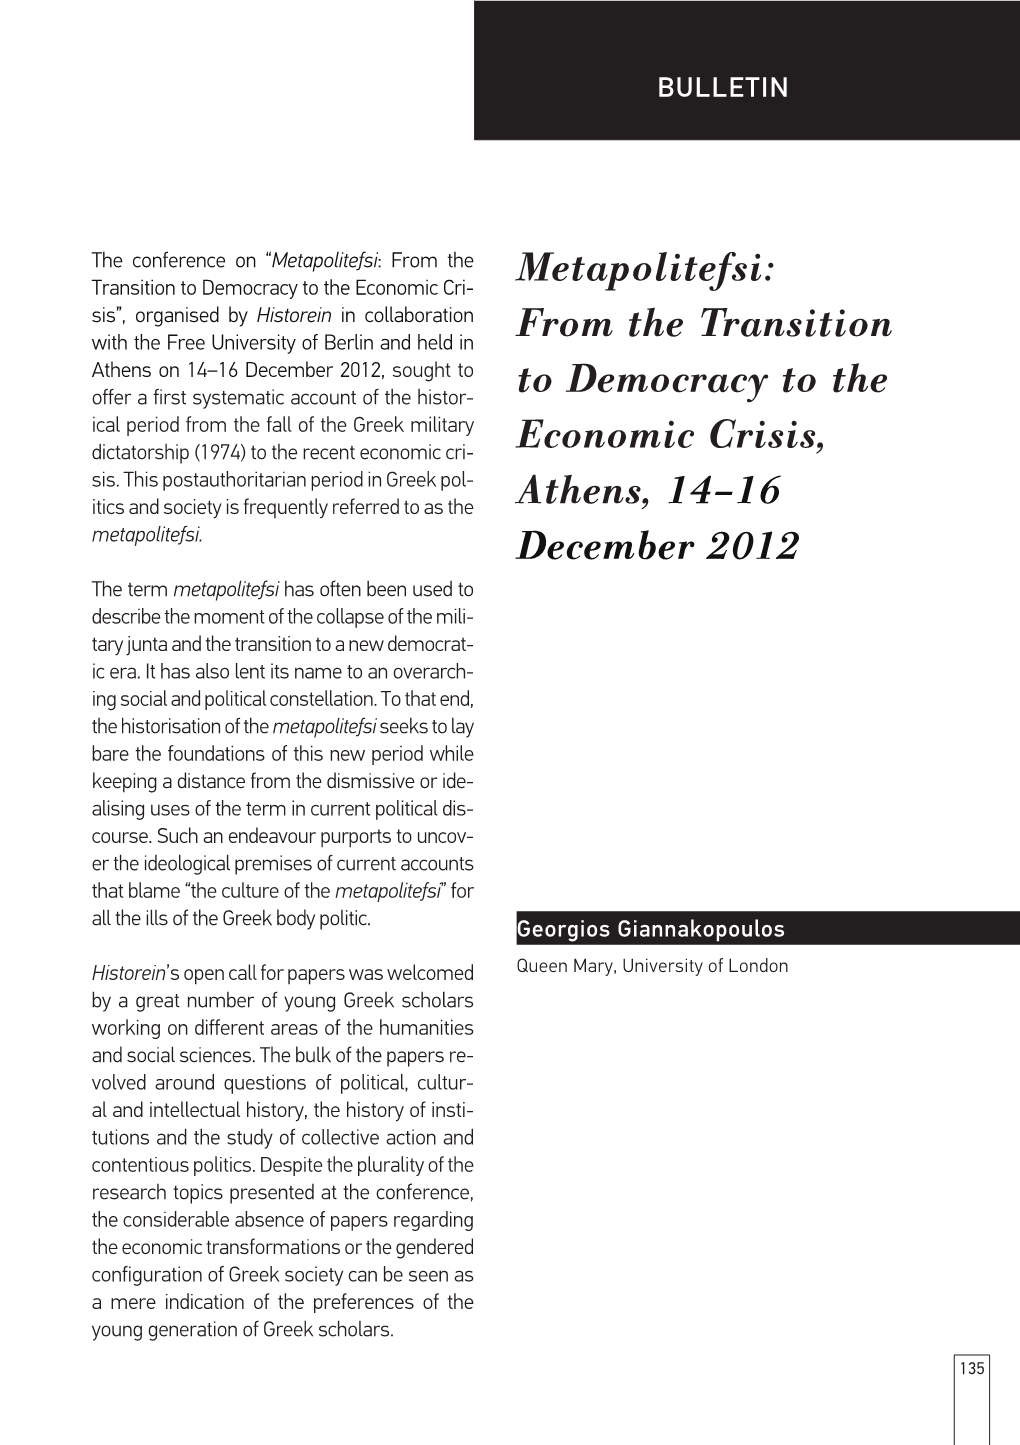 Metapolitefsi: from the Transition to Democracy to the Economic Crisis